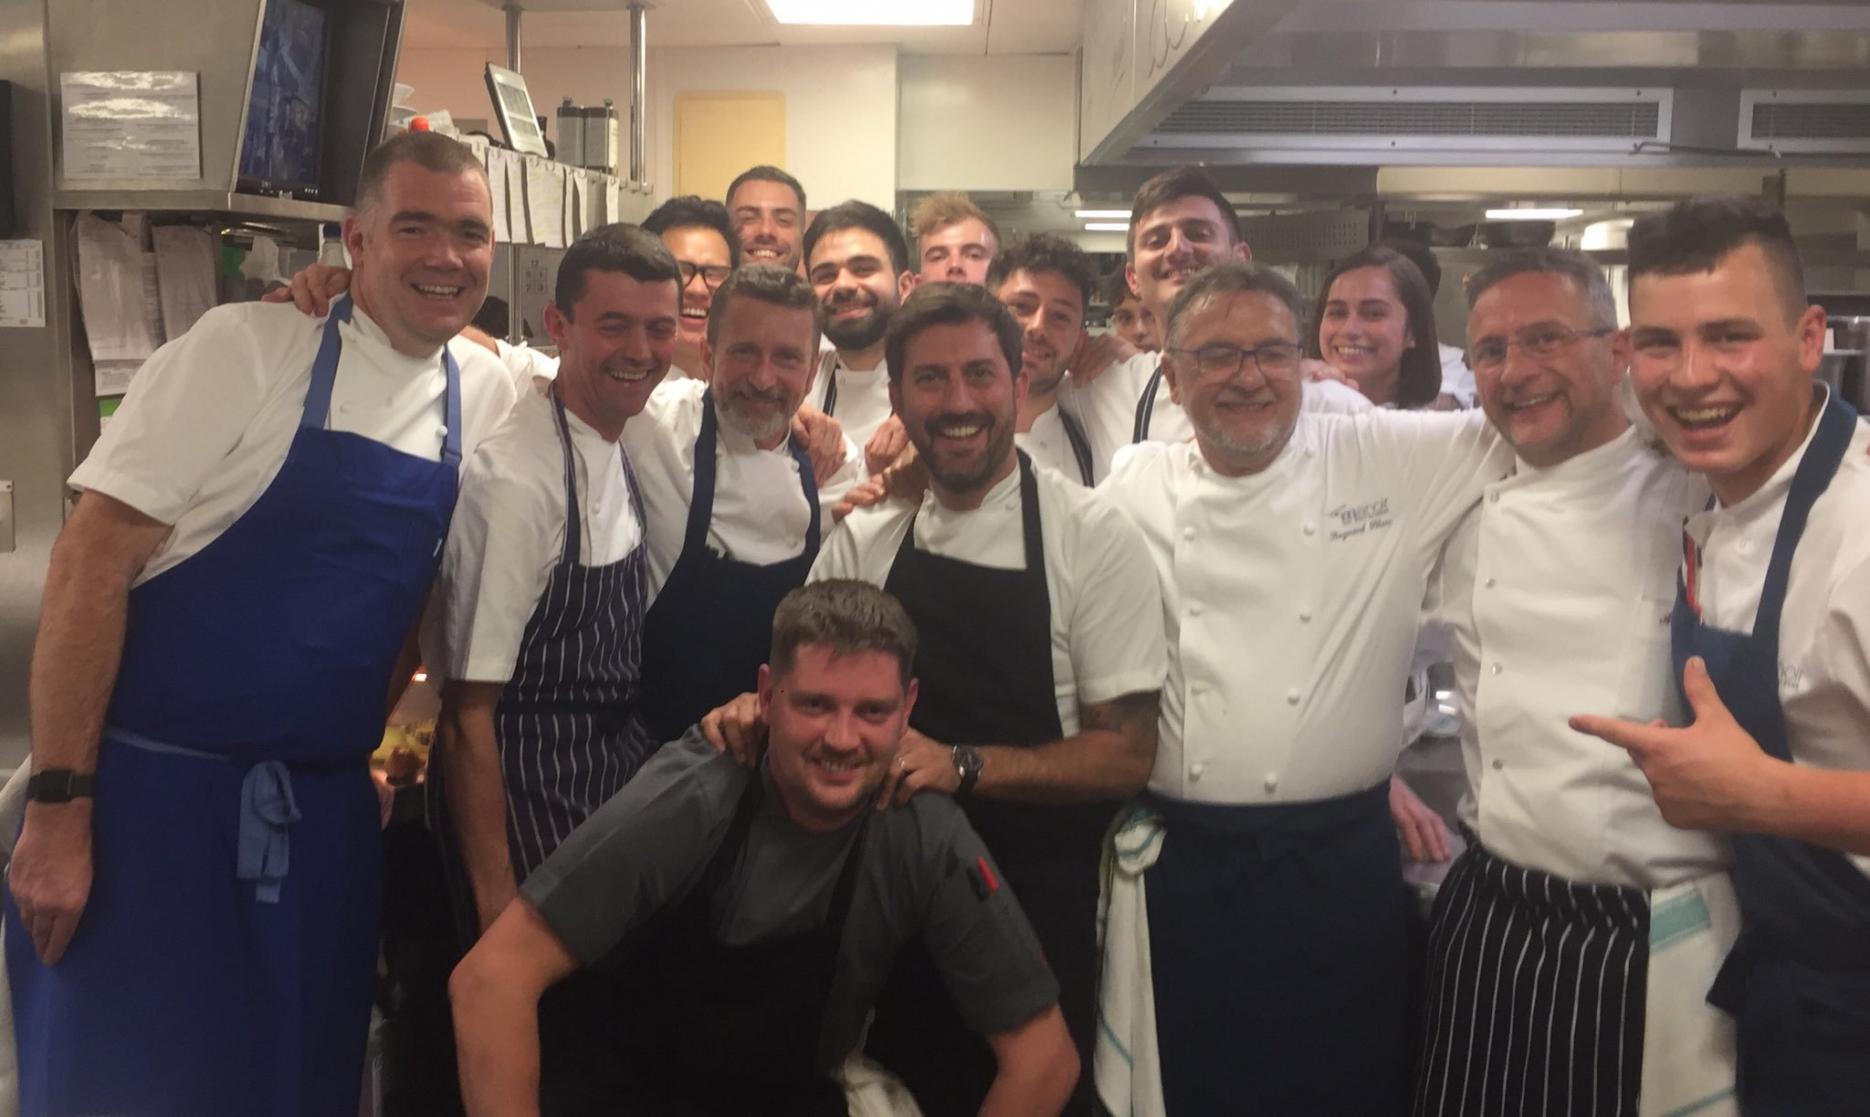 Michel Roux and Alain Roux hosted charity dinner for Adopt a School